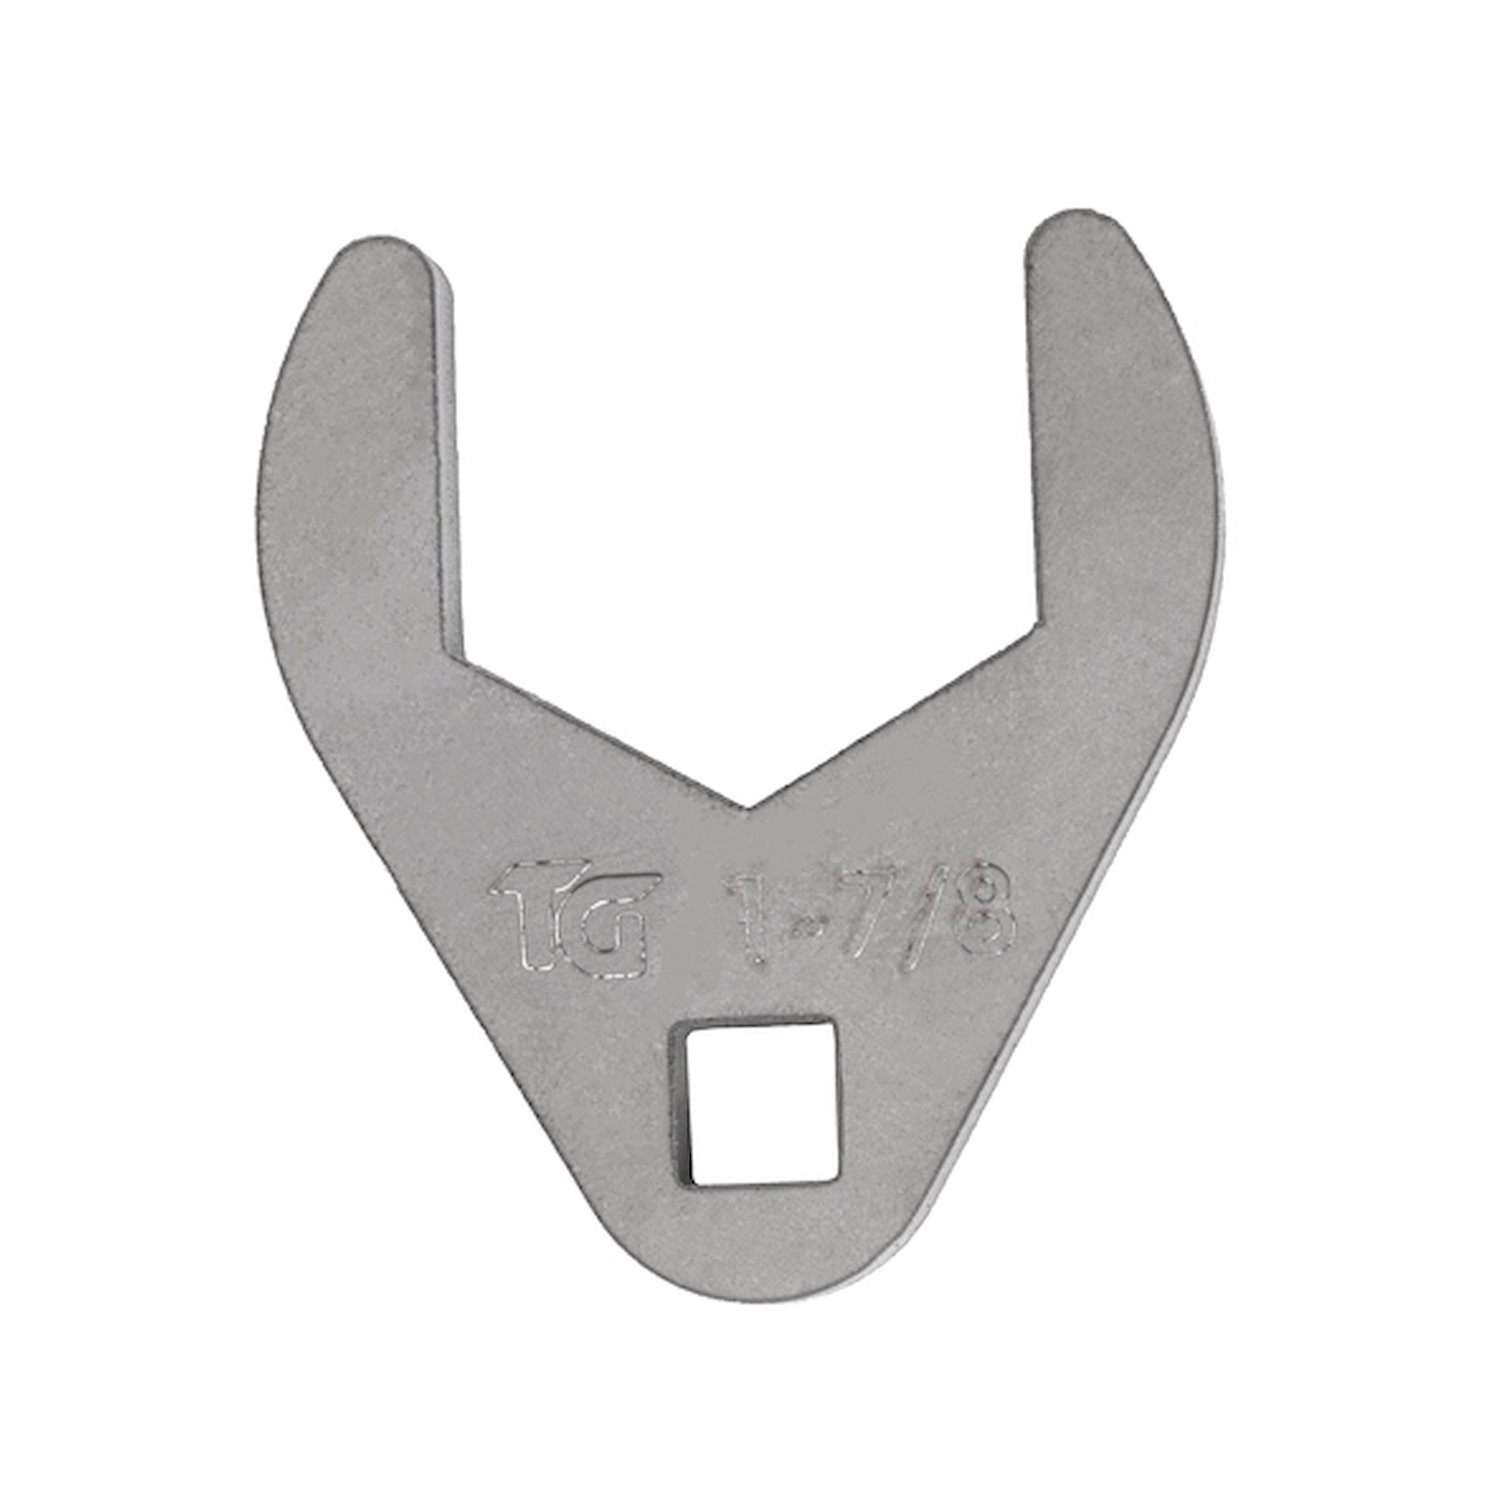 1-7/8" Crowfoot Wrench